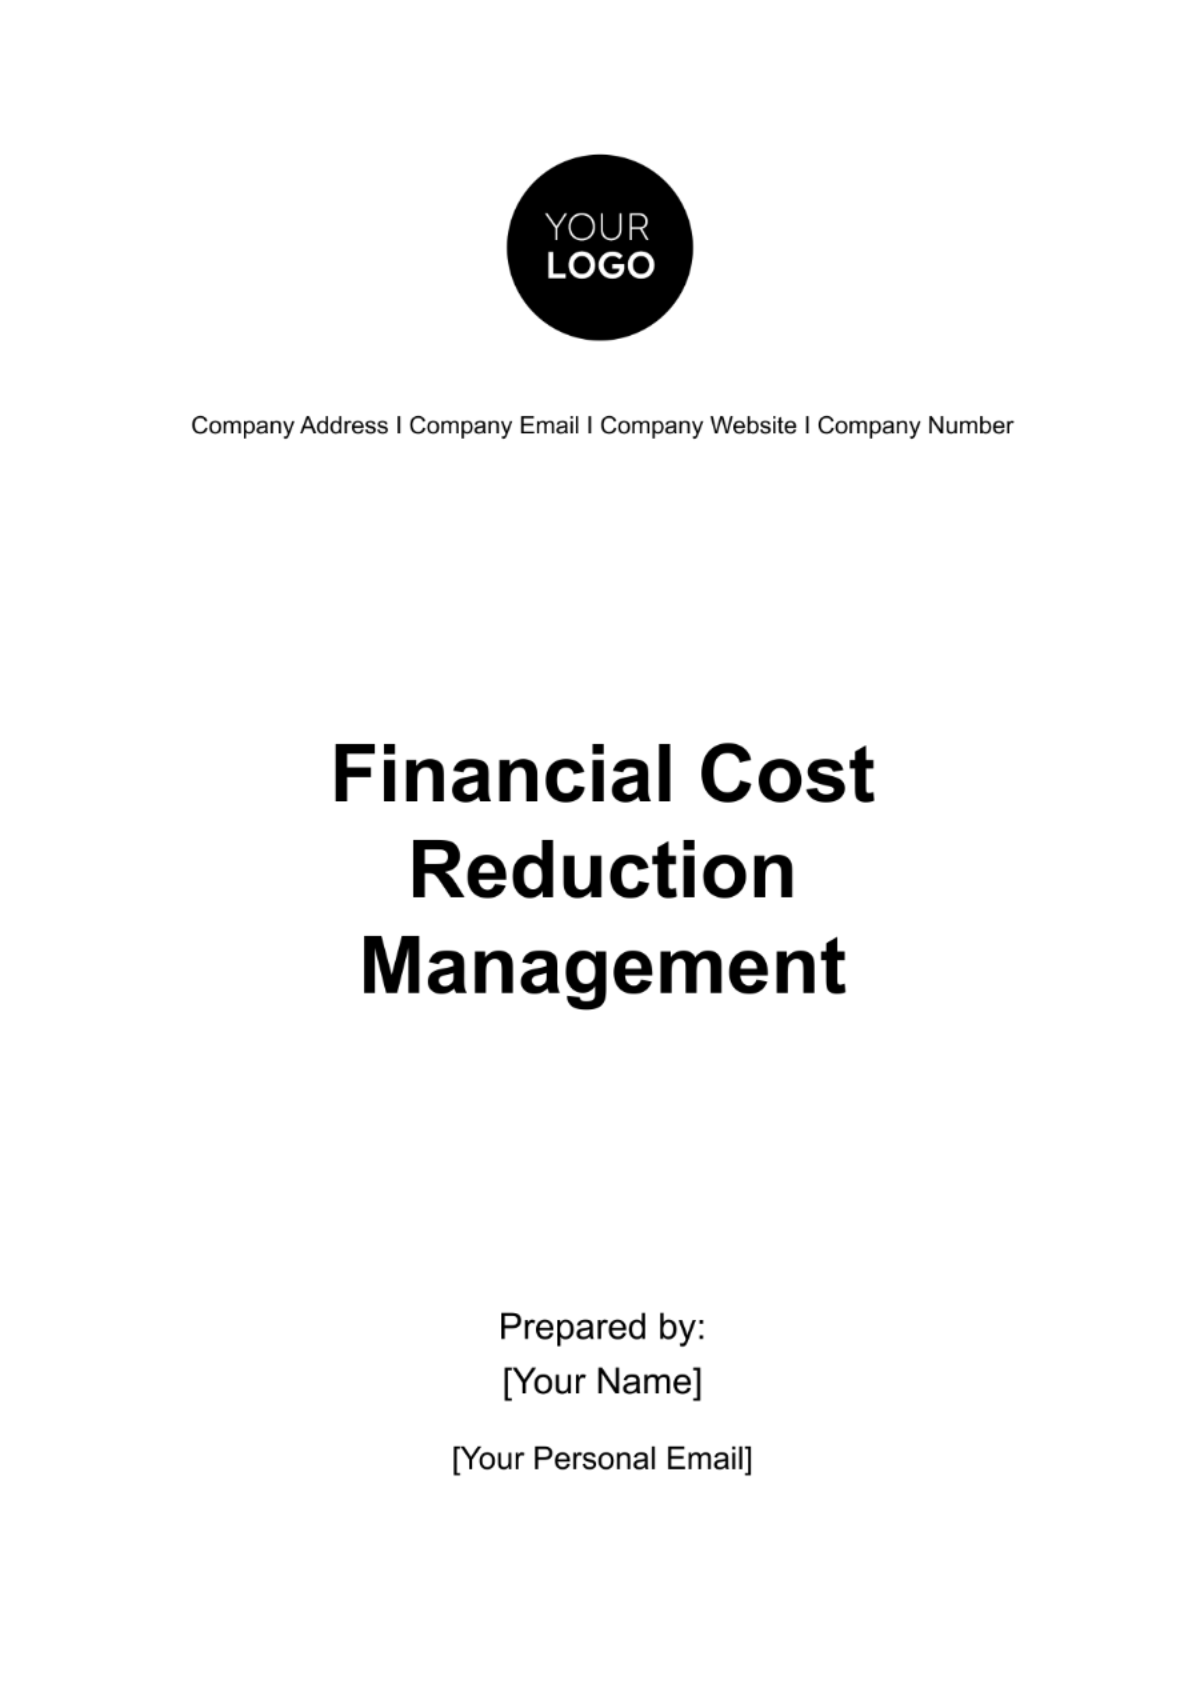 Financial Cost Reduction Management Template